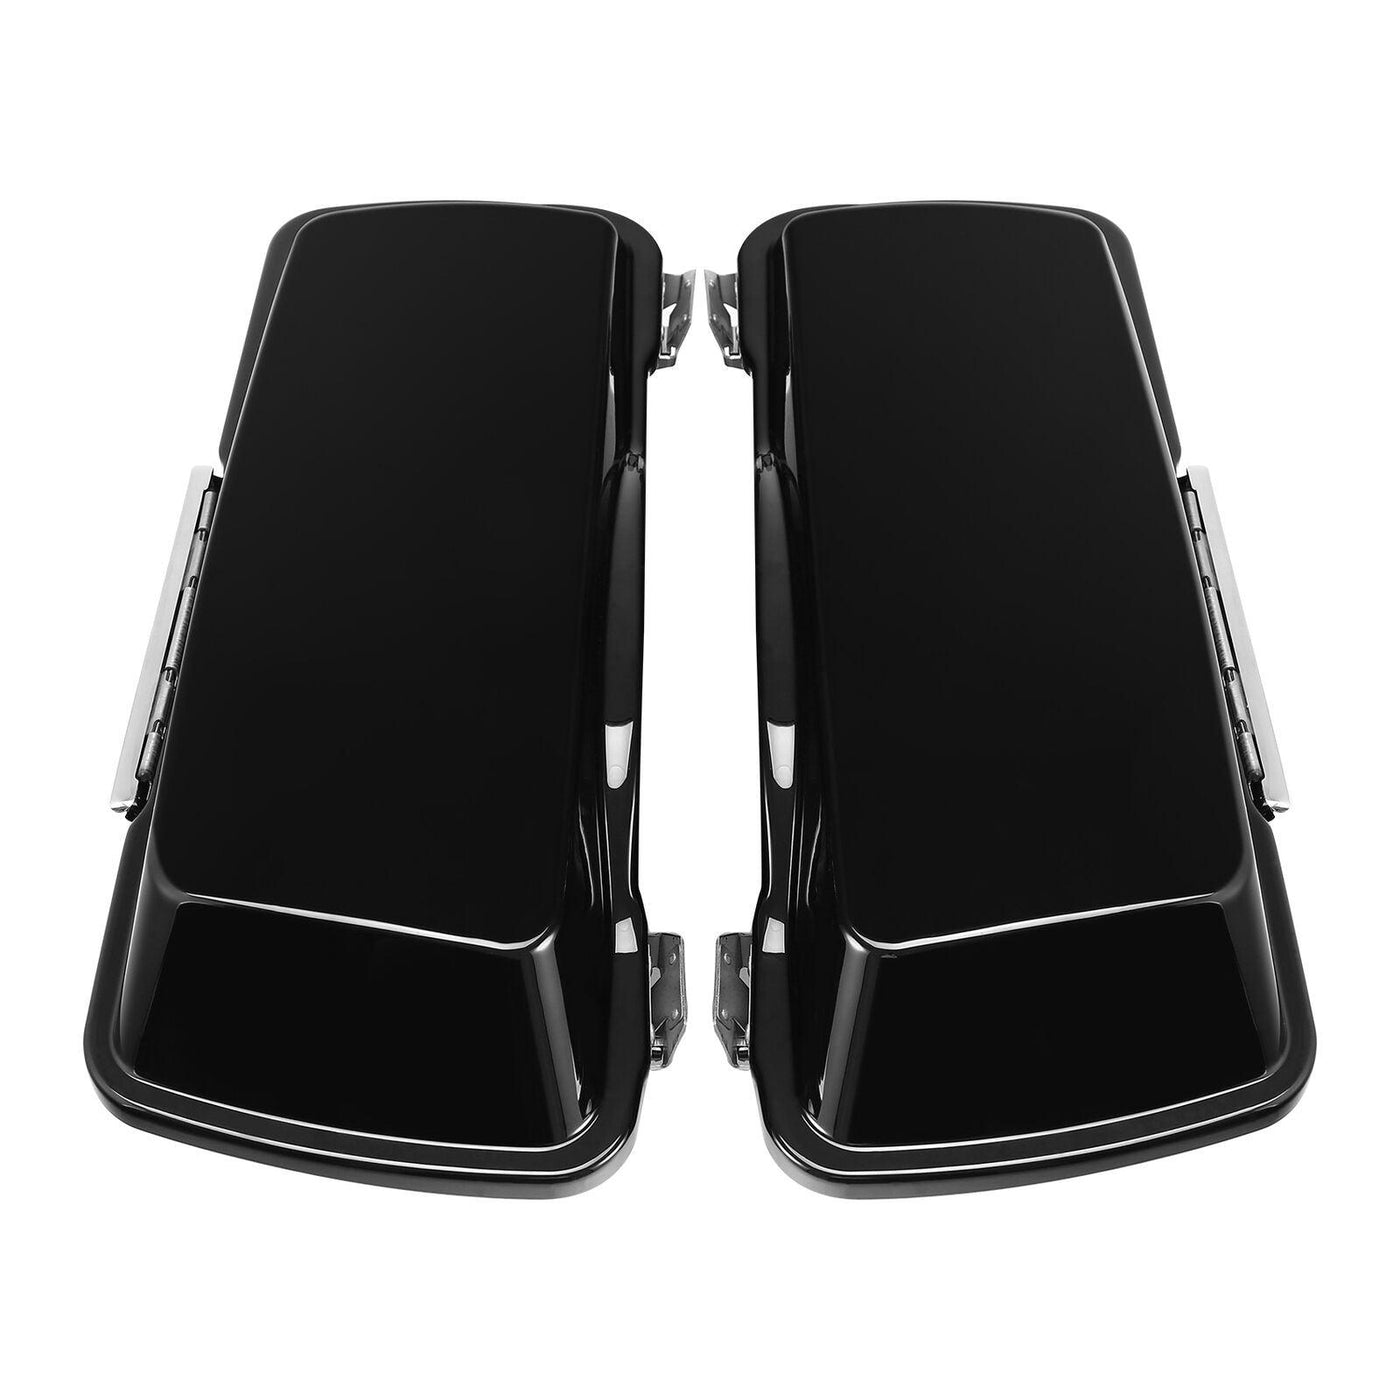 5" Vivid Black Stretched Saddlebags Fit For 93-13 Harley Touring Road King Glide - Moto Life Products